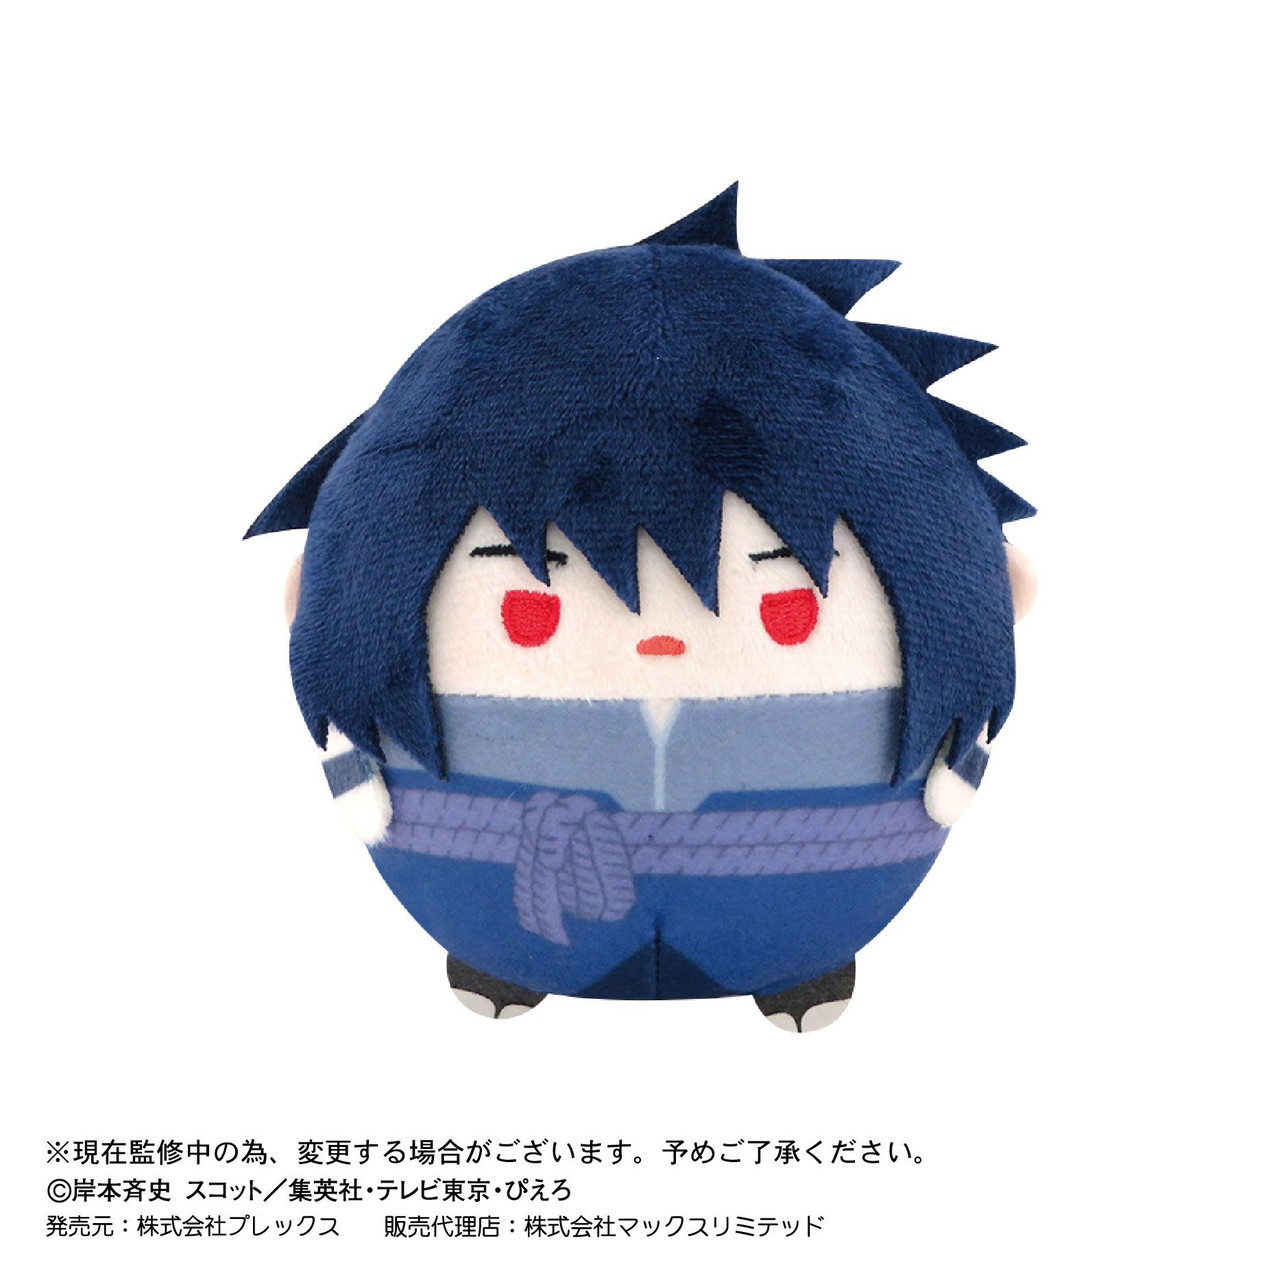 Fuuto Tantei (Fuuto PI) Merch Page 3  Buy from Goods Republic - Online  Store for Official Japanese Merchandise, Featuring Plush